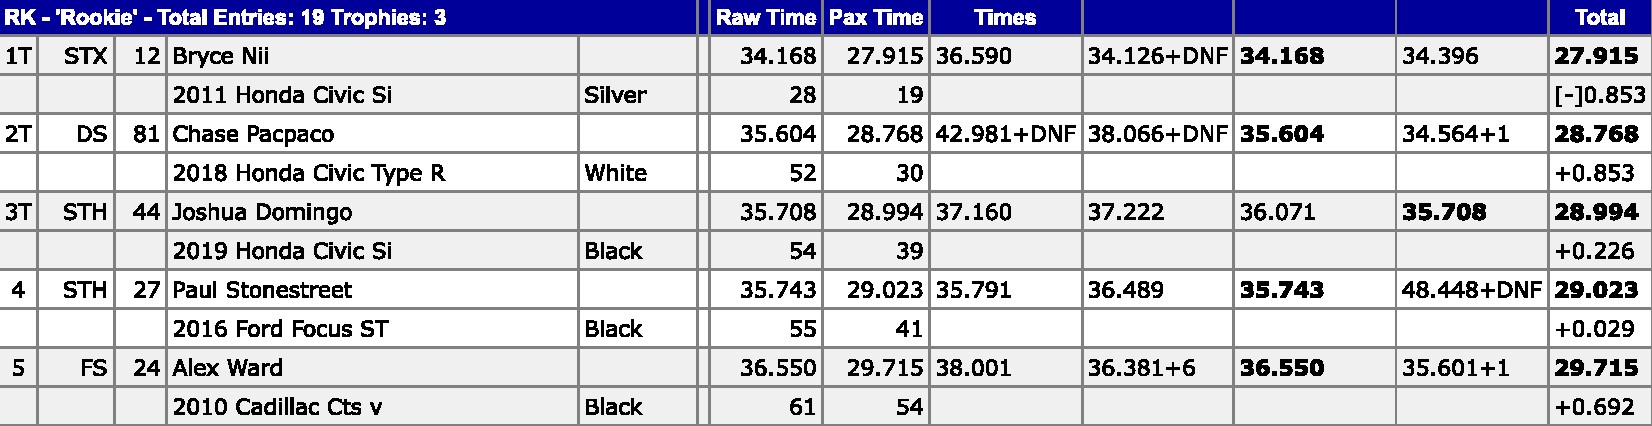 SCCA Race 6 results